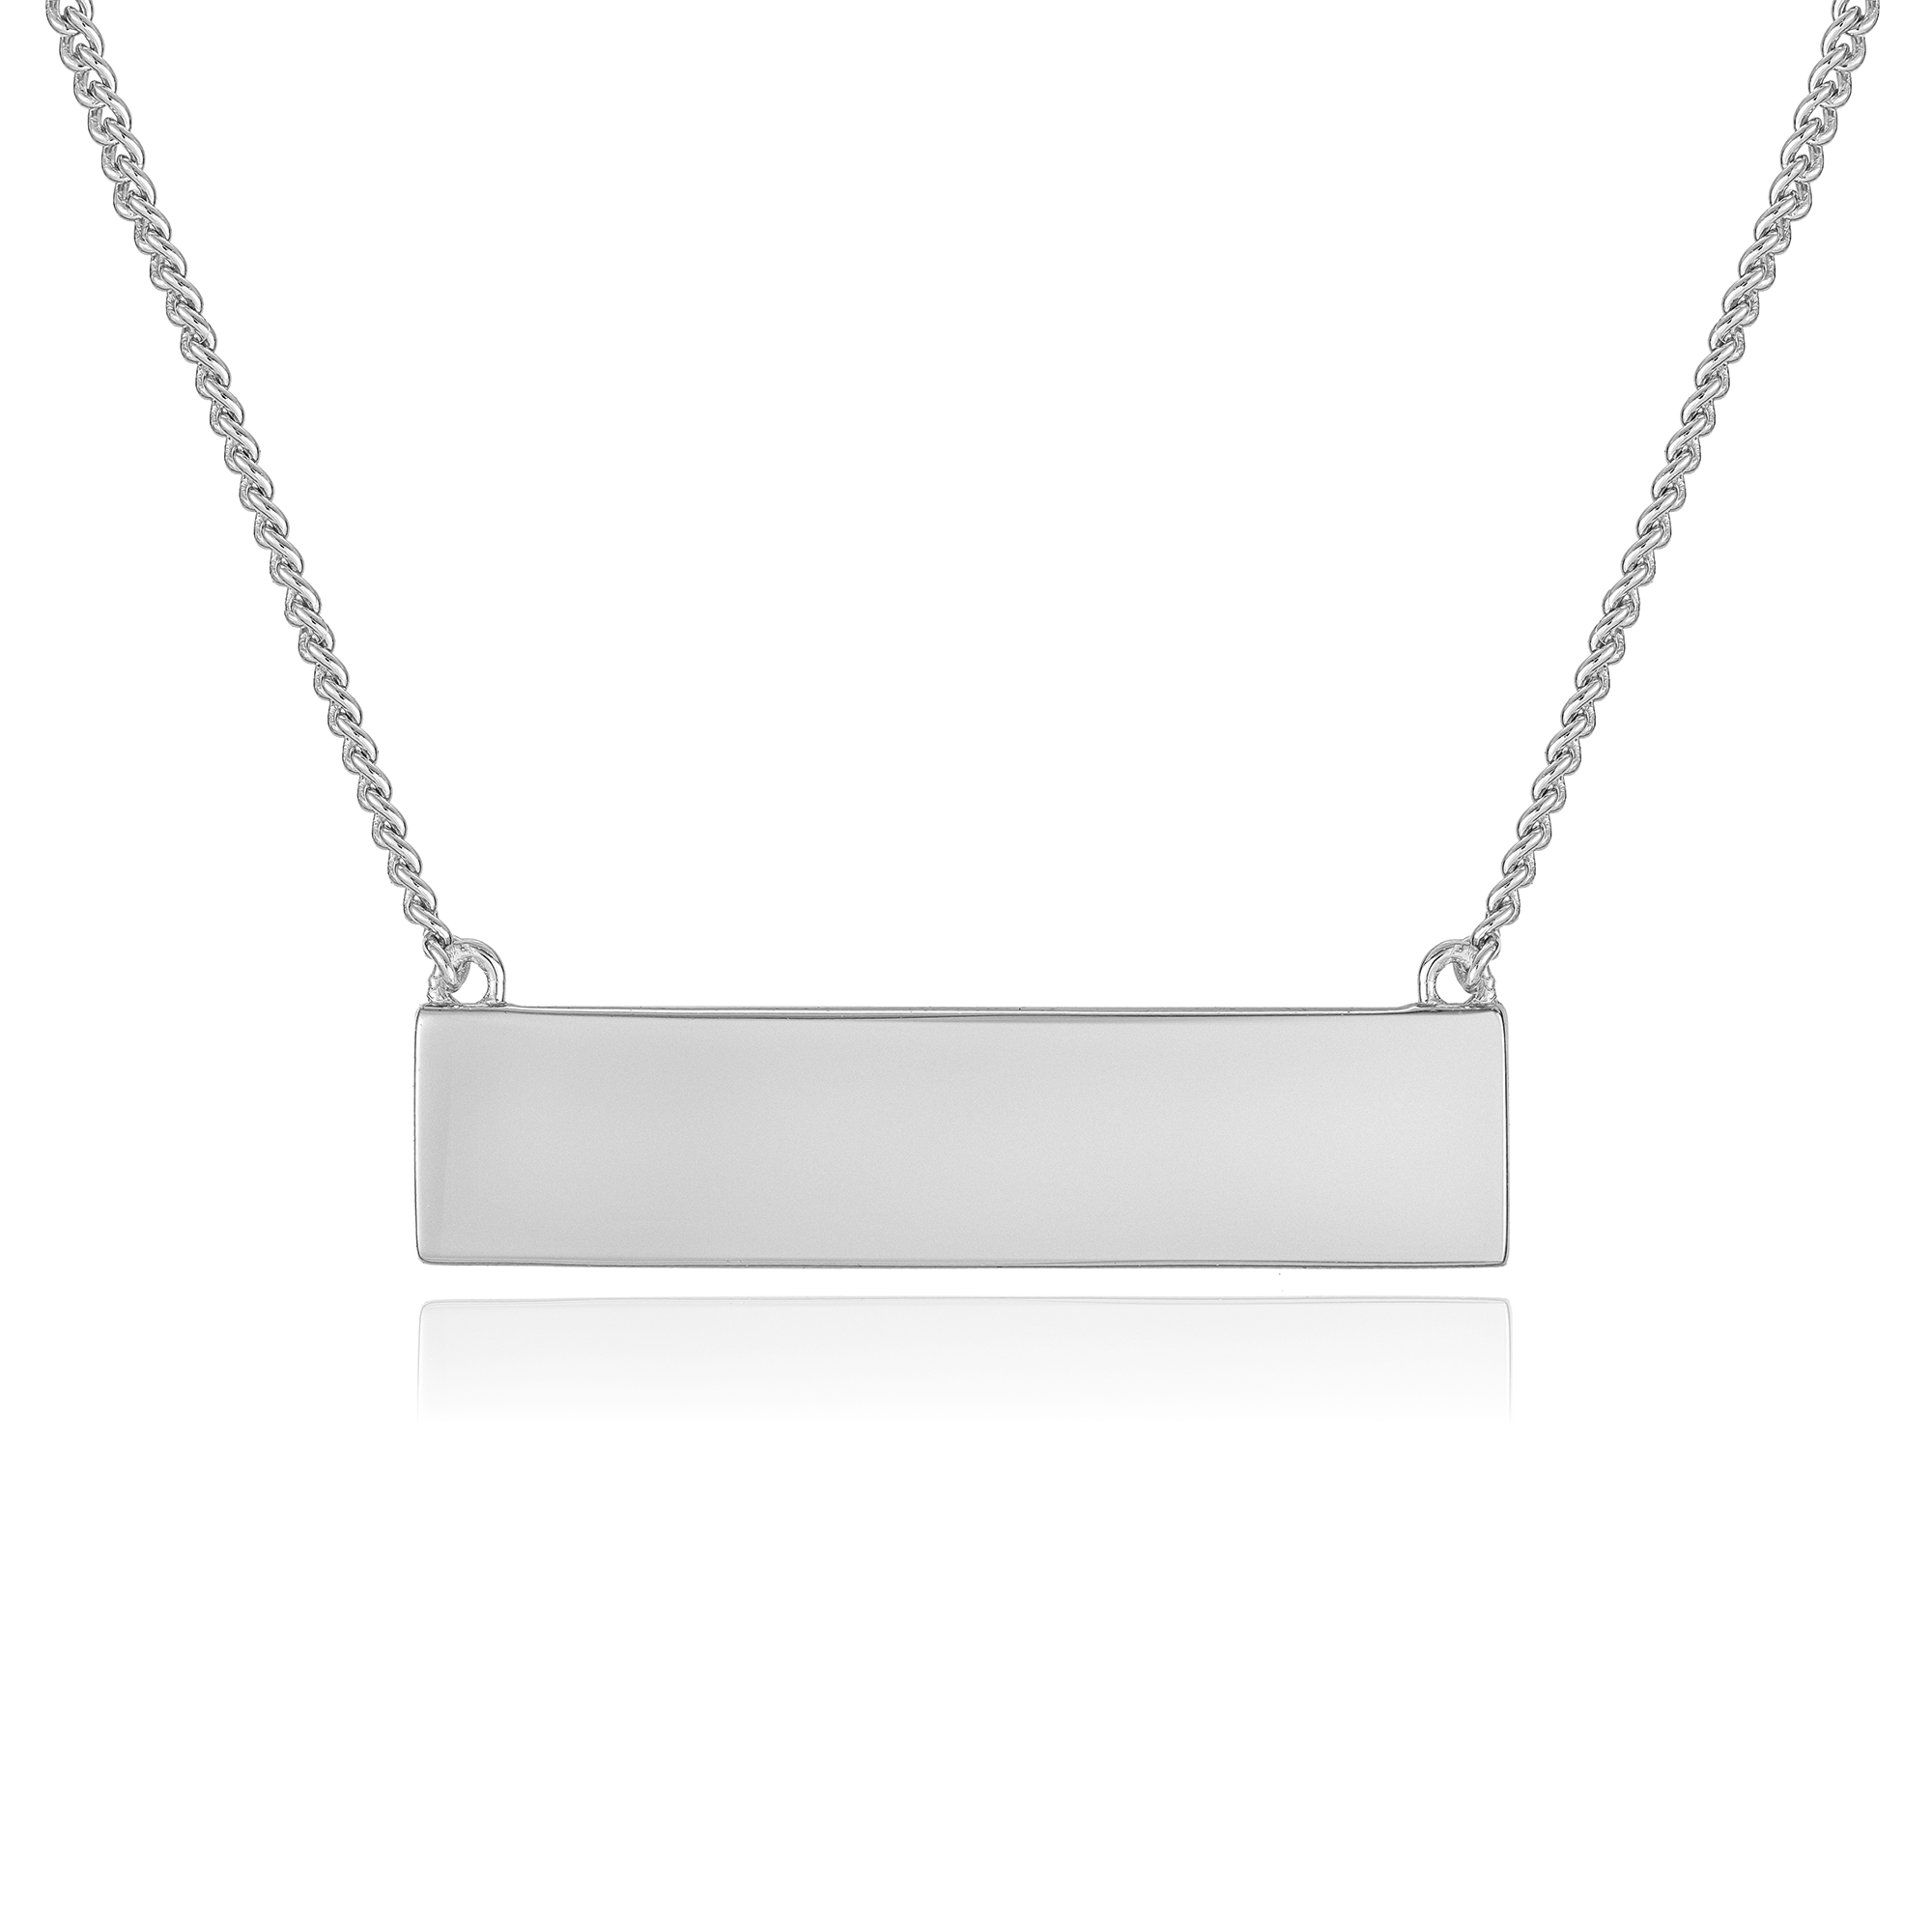 Aspen Name Plate Necklace